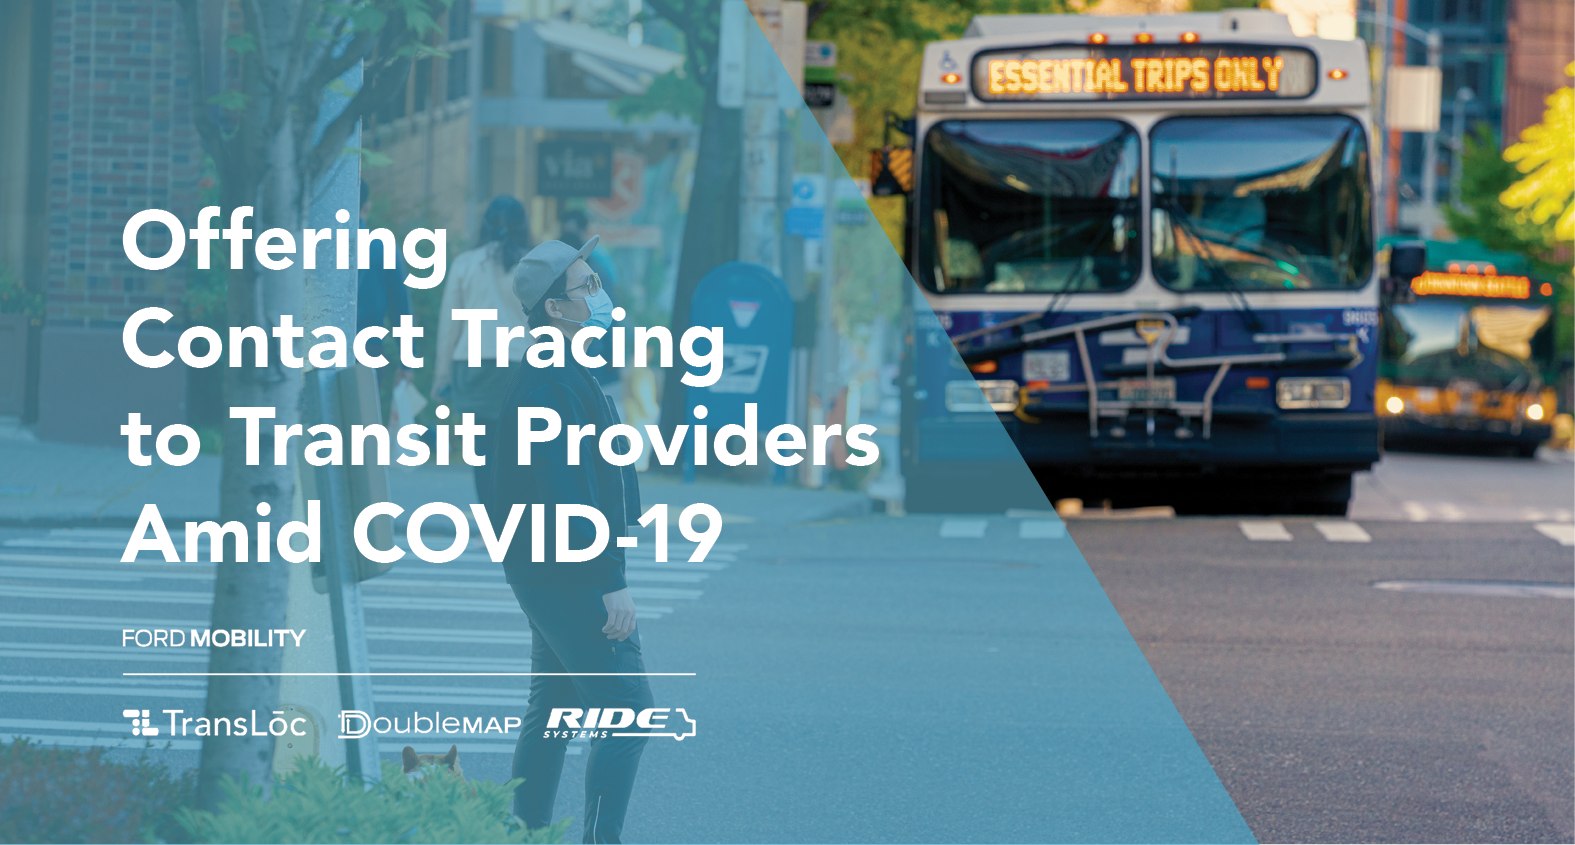 Offering contact tracing to transit providers amid Covid-19